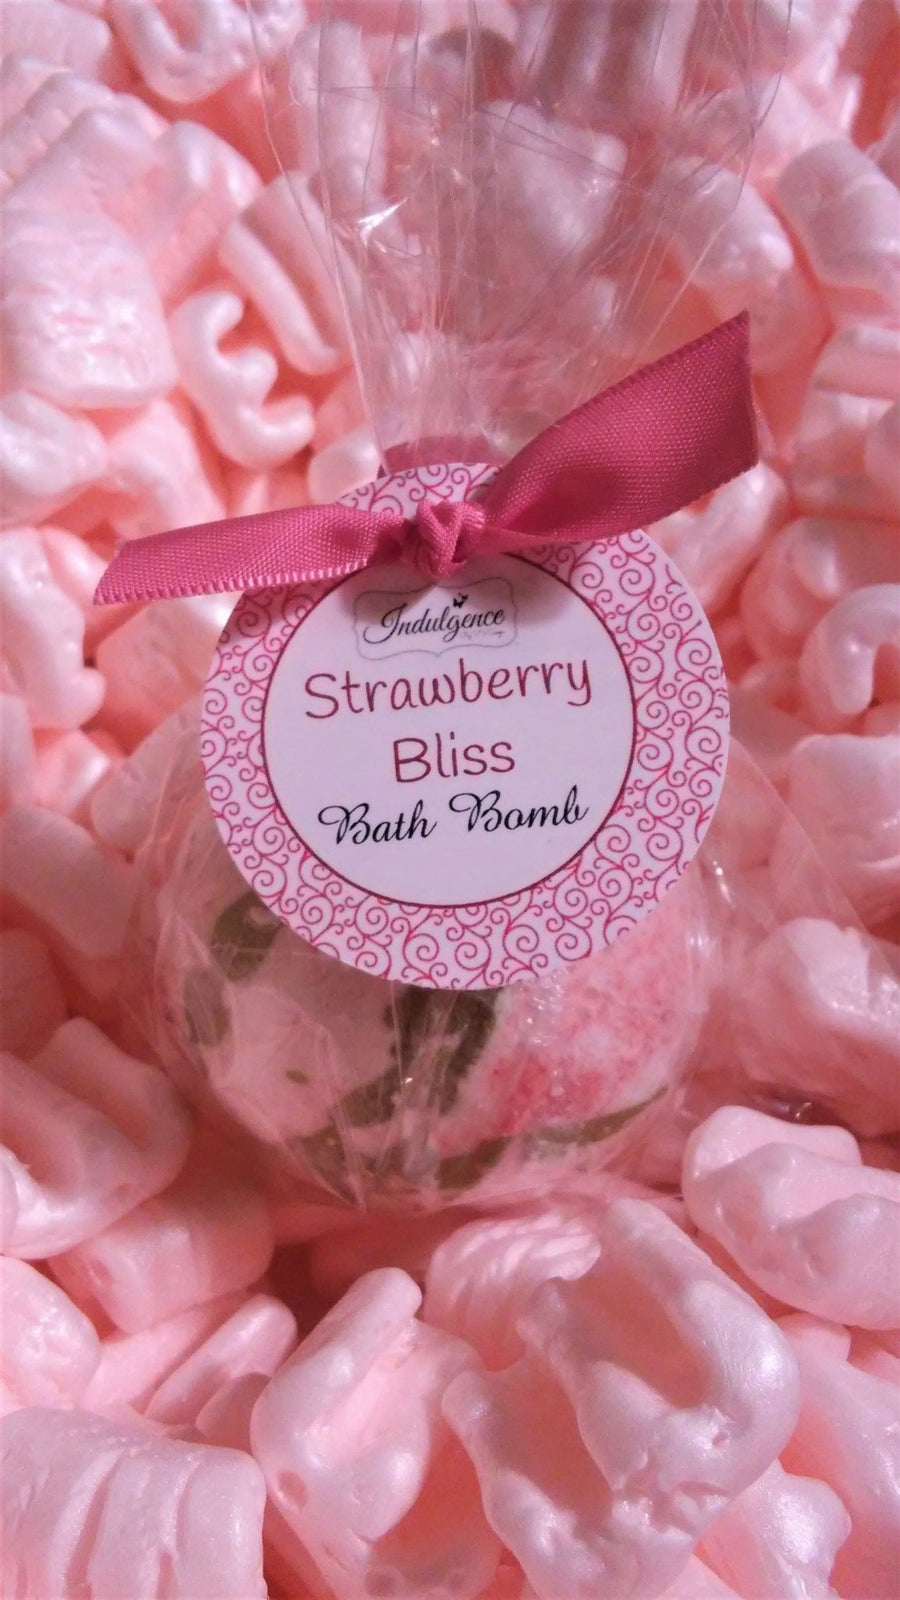 Strawberry Bliss Bath Bomb In Packaging